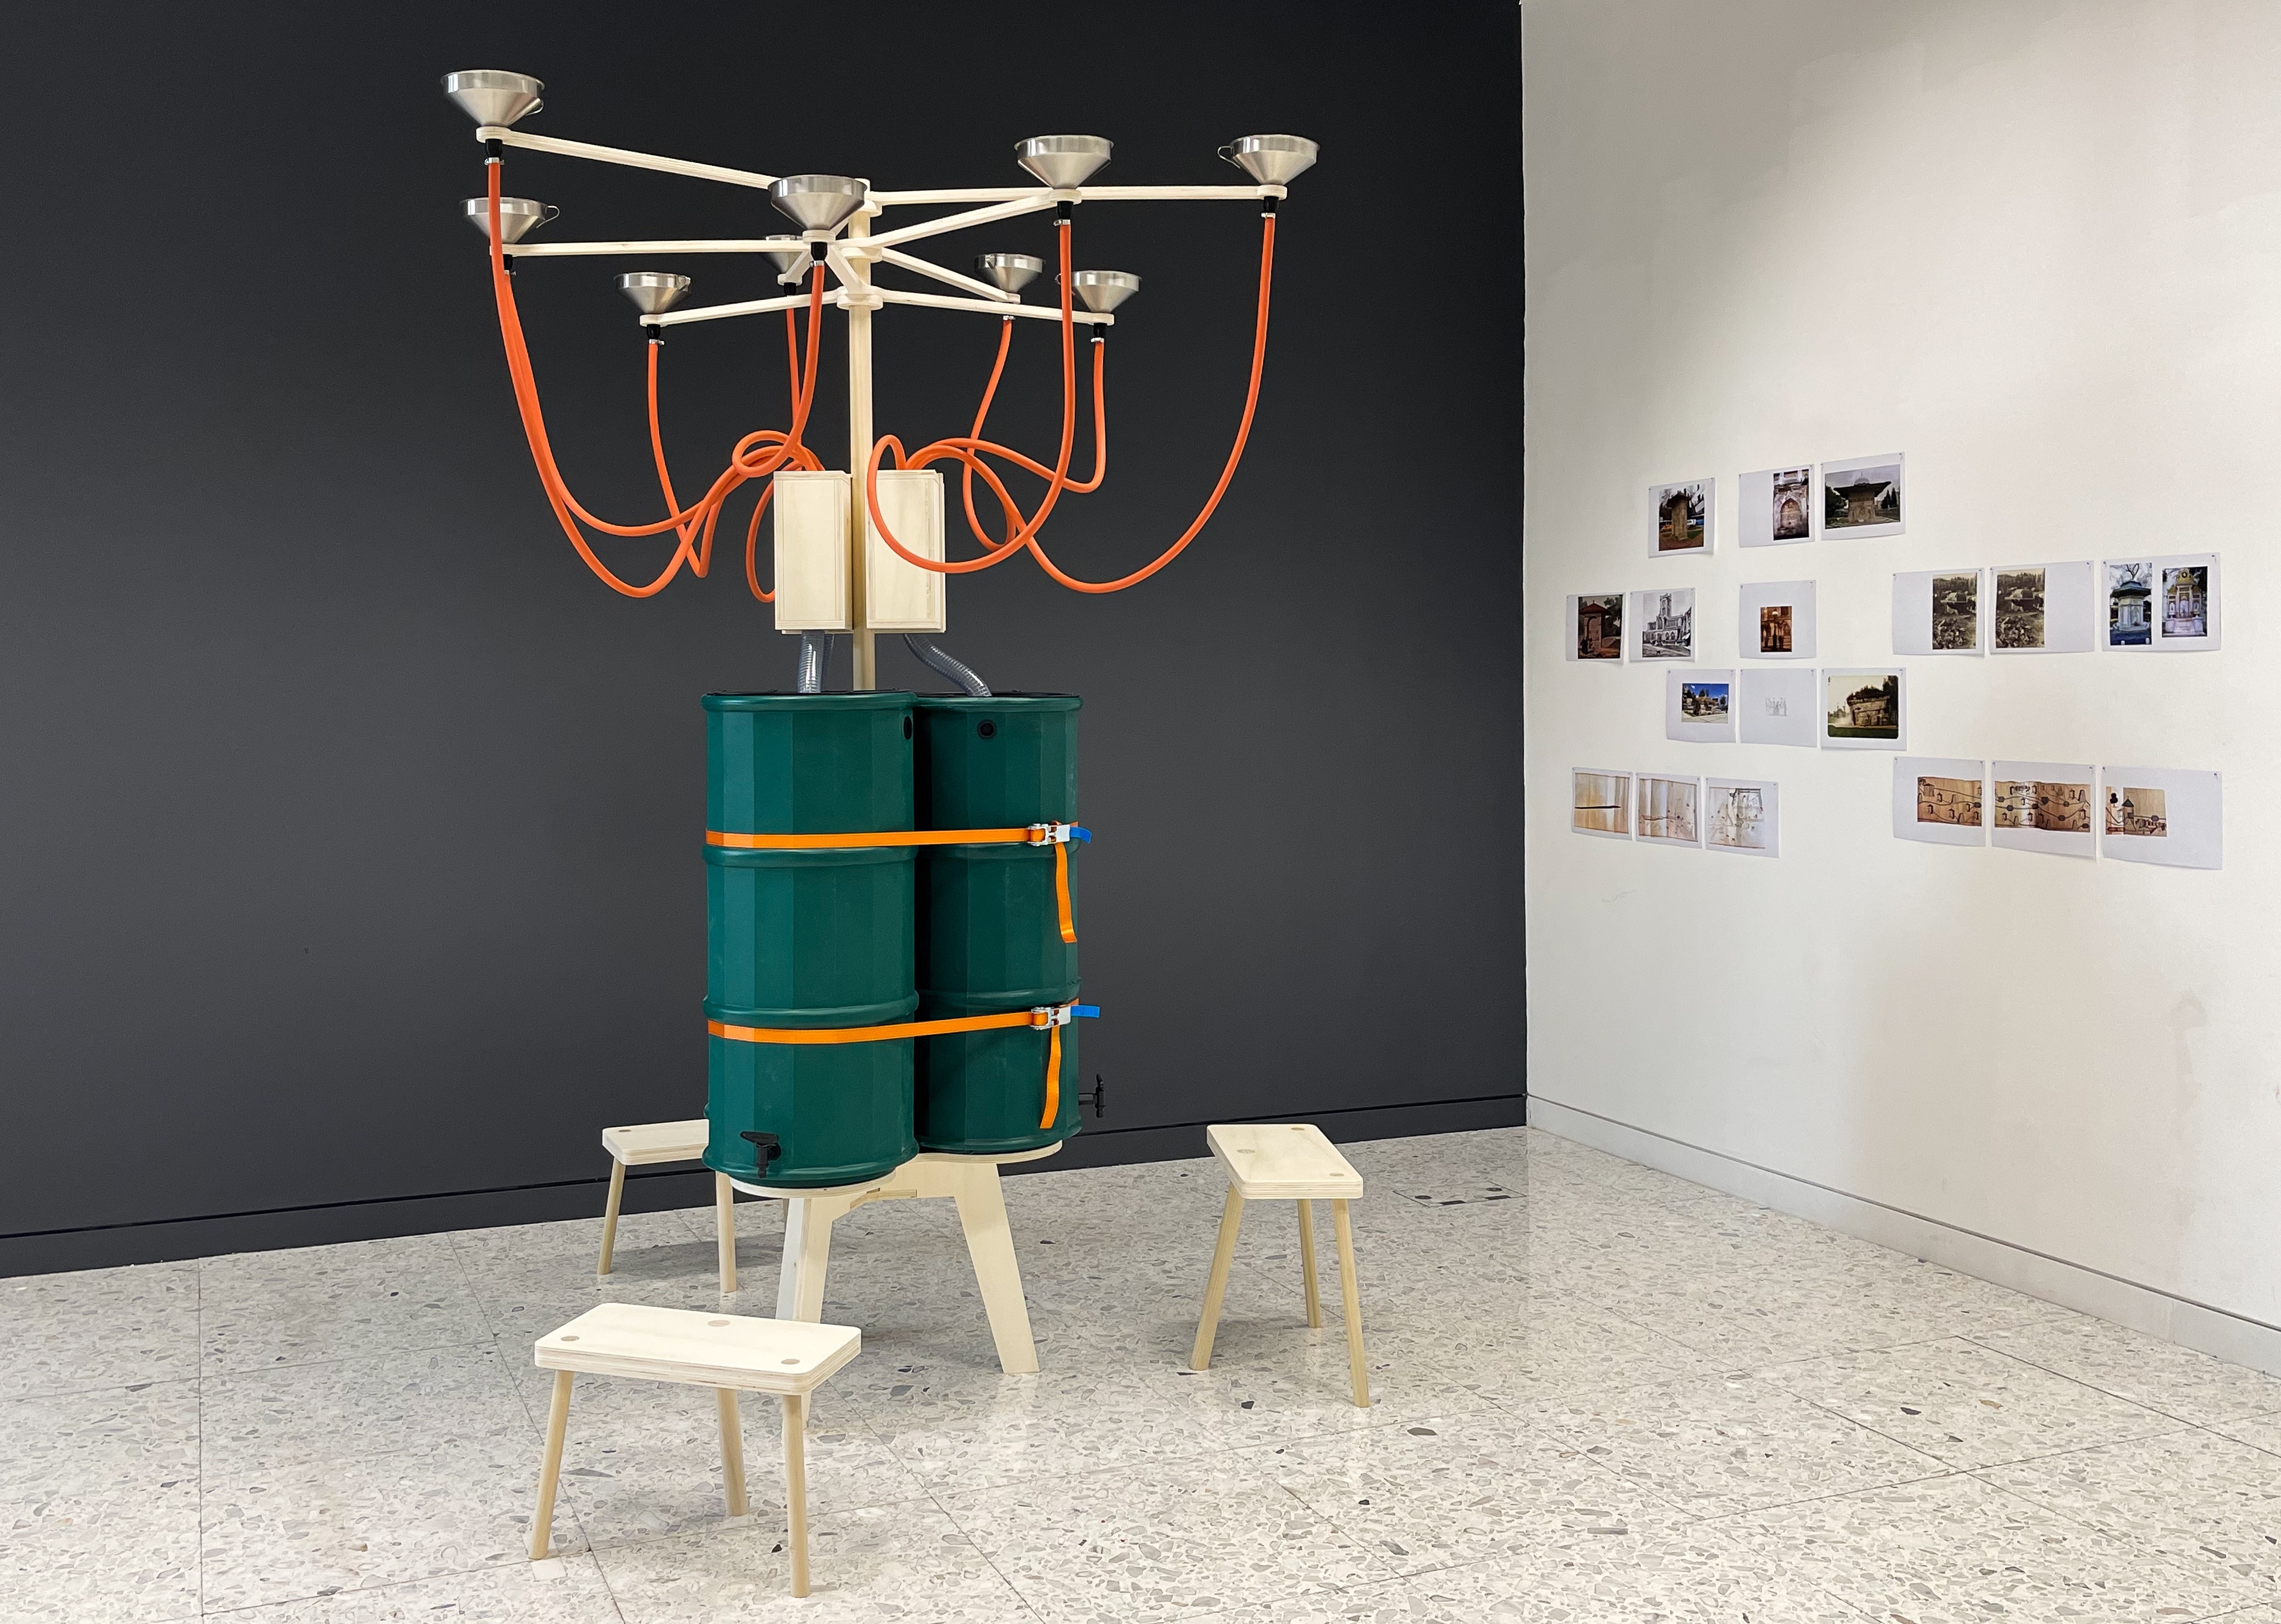 A sculpture crafted from pipes and water butts, presented in a gallery space.